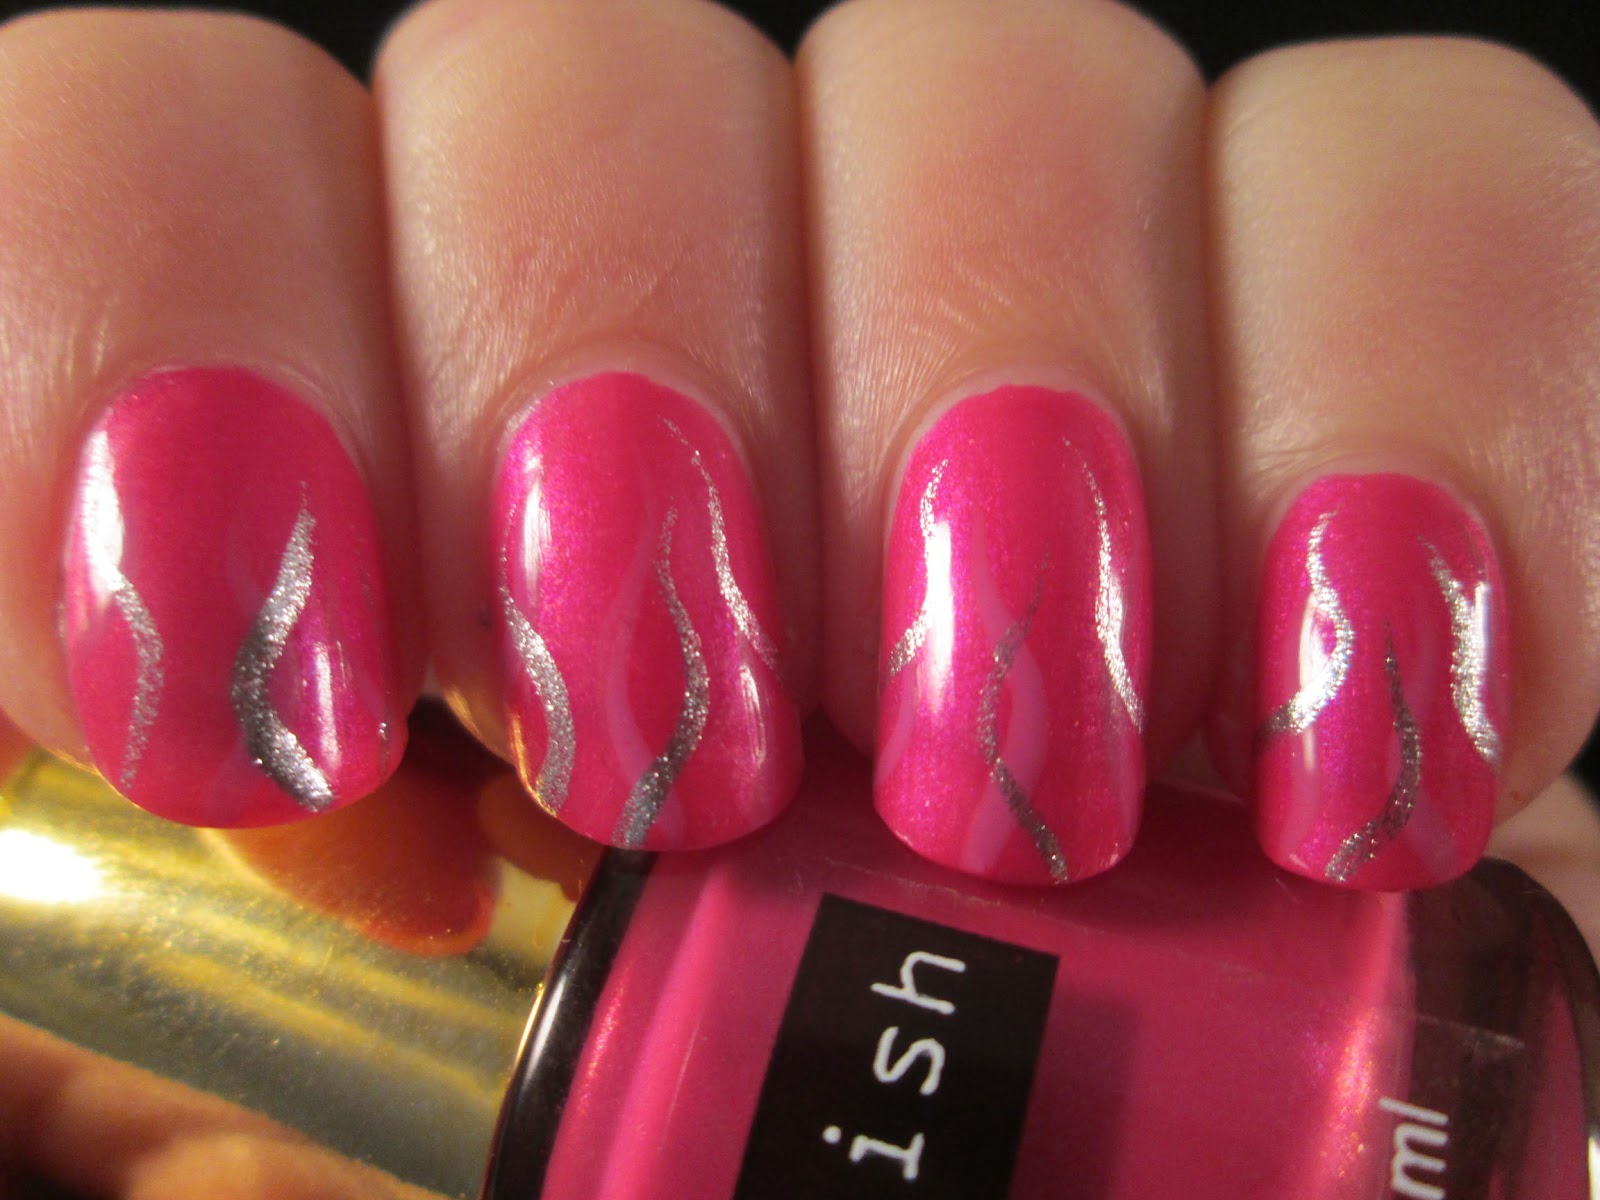 PiggieLuv Silver on pink squiggly nail art